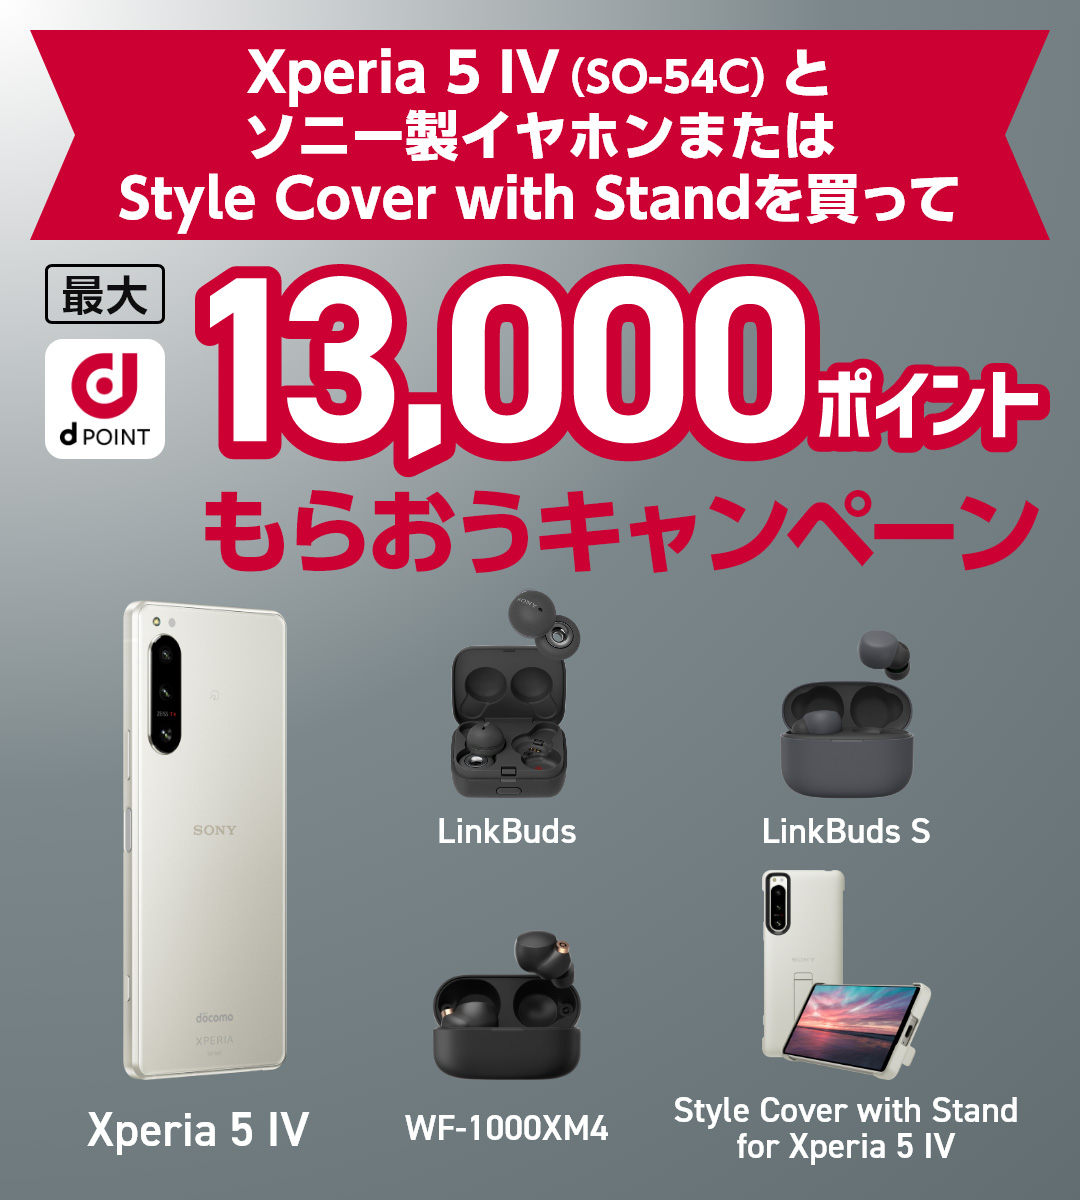 Xperia 5 IV (SO-54C)とソニー製イヤホンまたはStyle Cover with Standを買って最大13,000dポイントもらおうキャンペーン